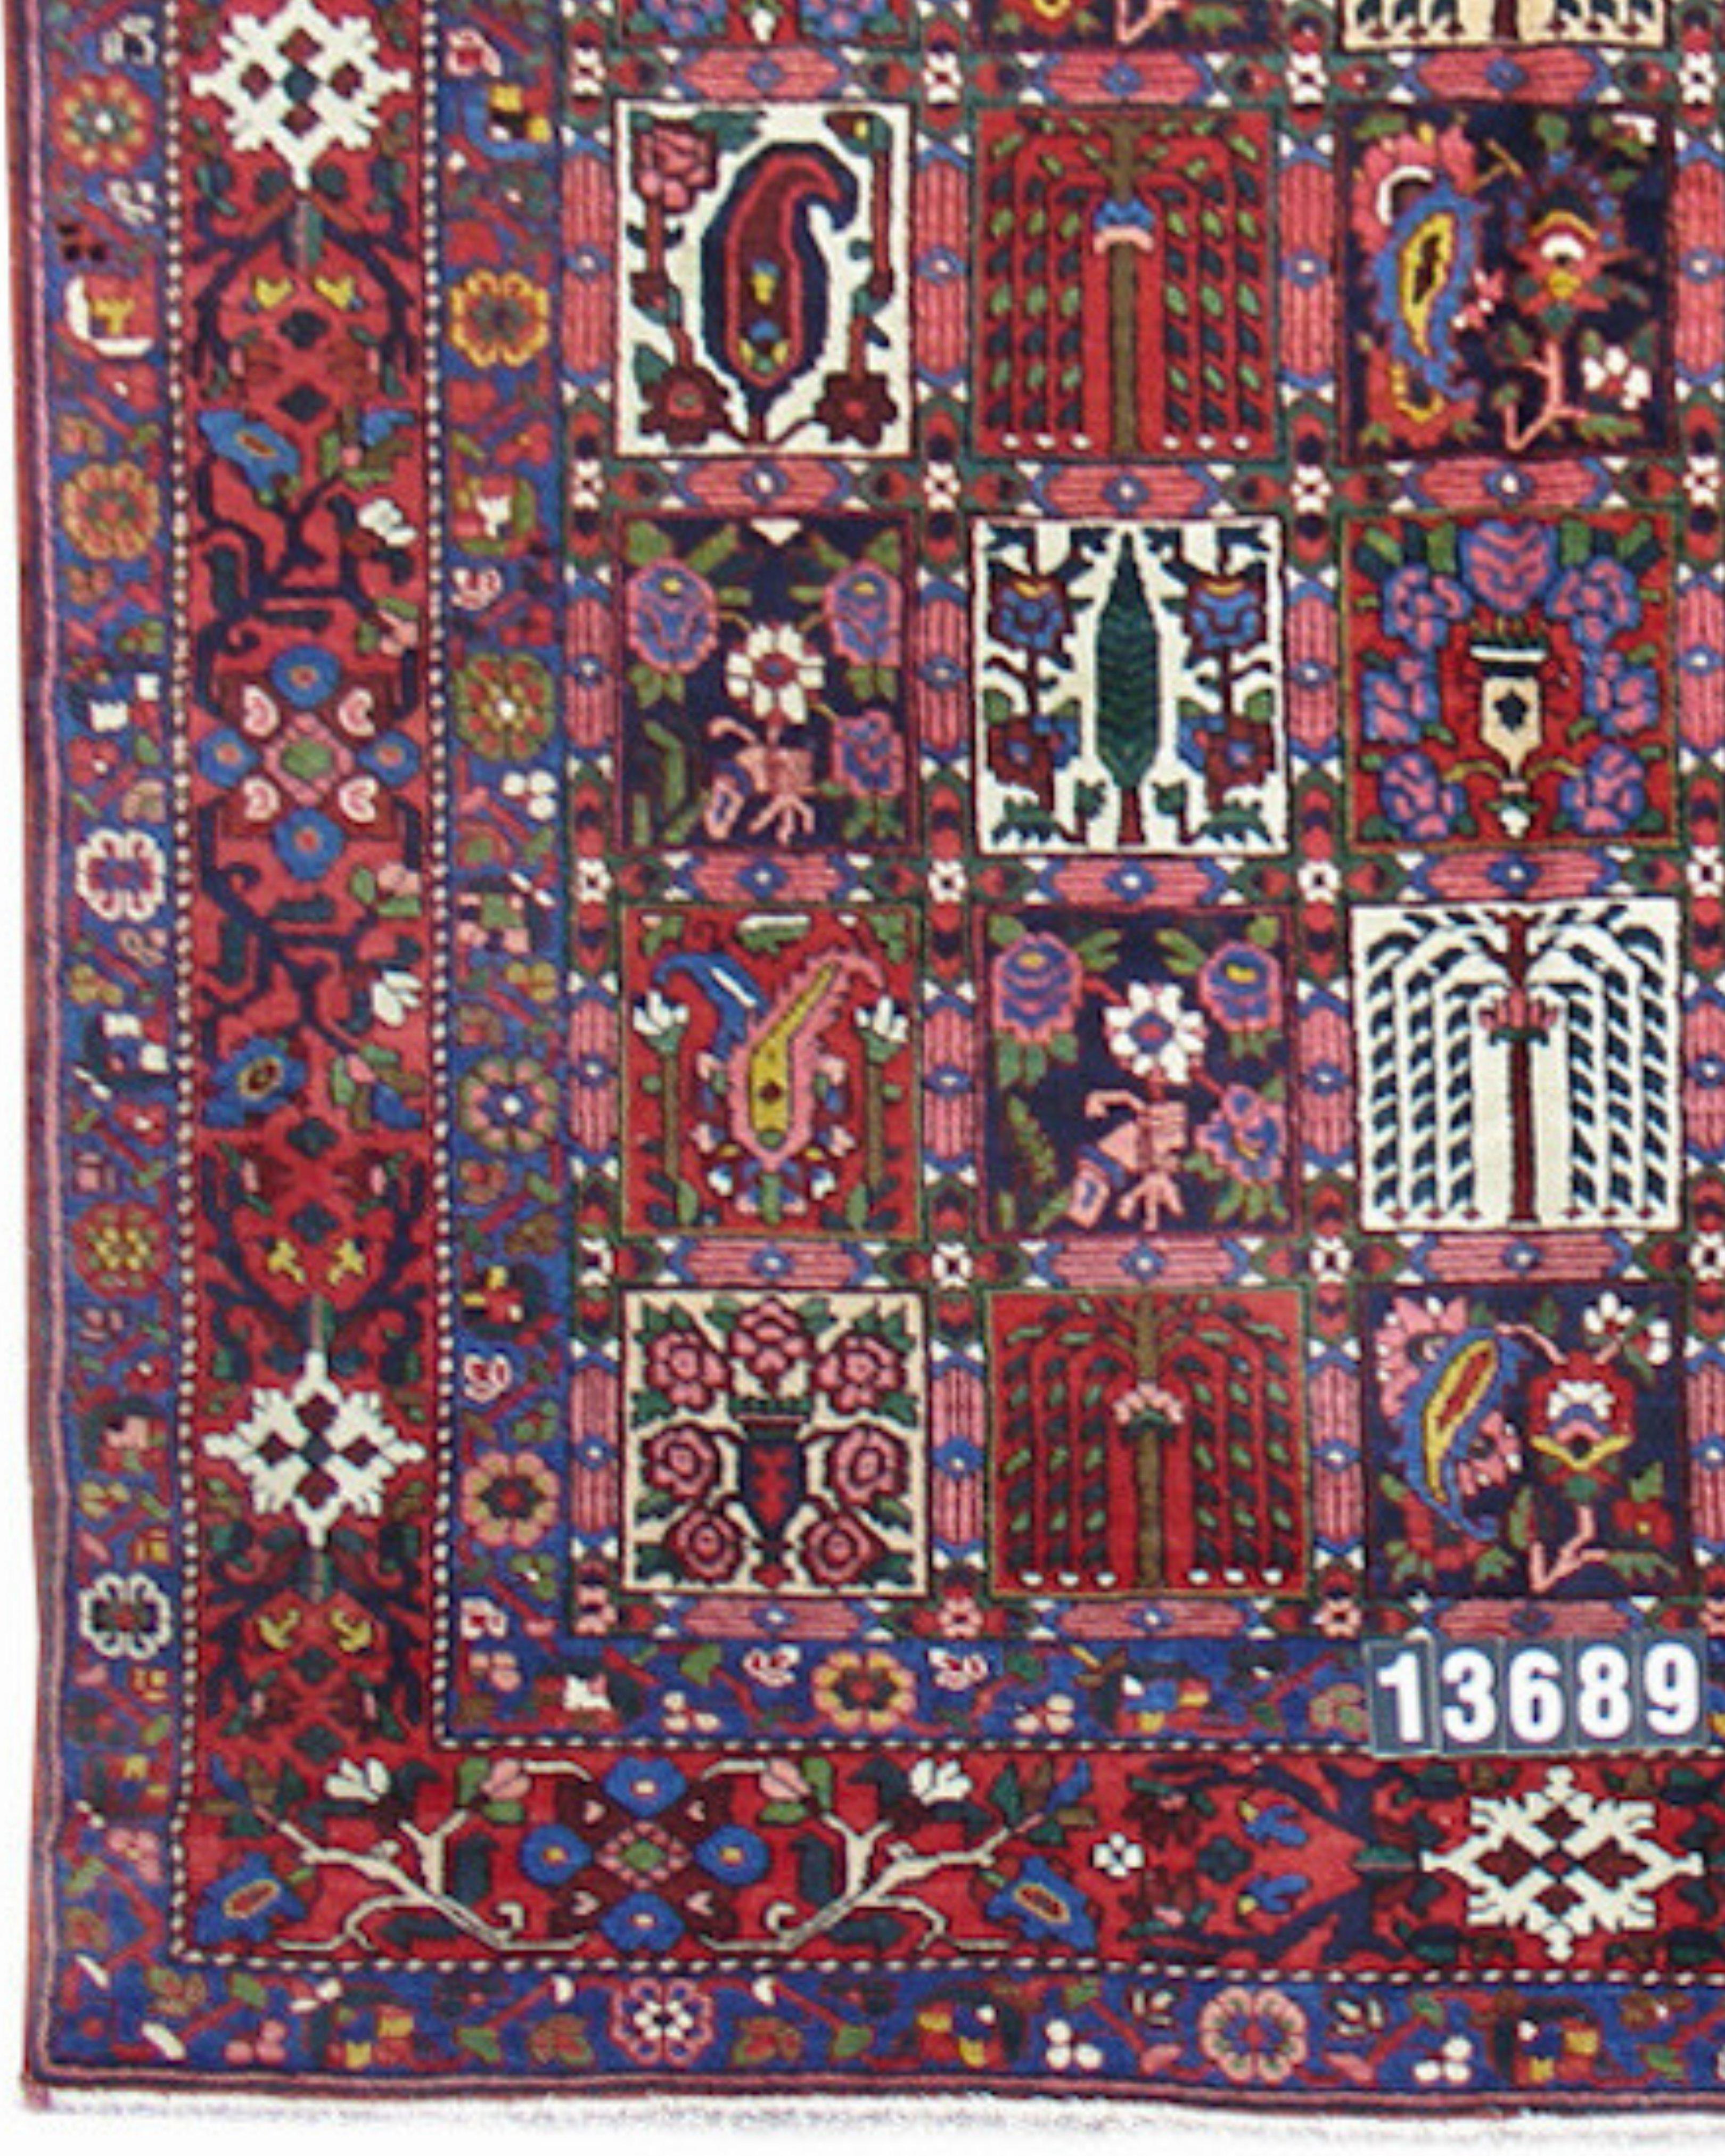 Hand-Woven Antique Persian Bakhtiari Rug, Early 20th Century For Sale